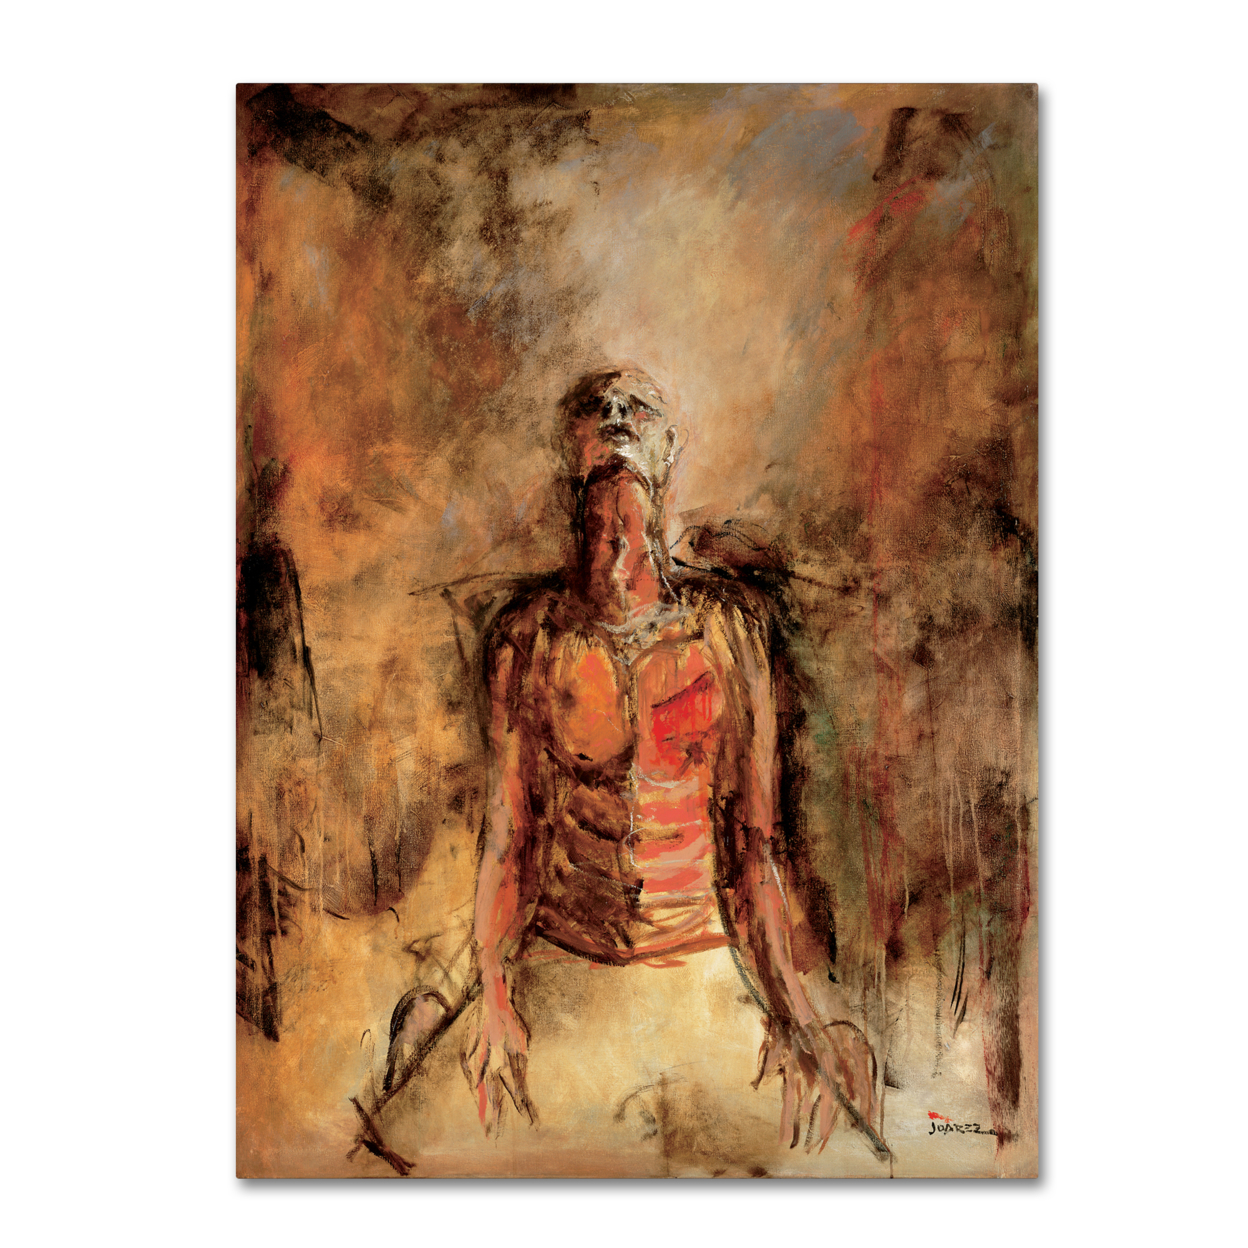 Joarez 'Totally Surrender' Canvas Wall Art 35 X 47 Inches